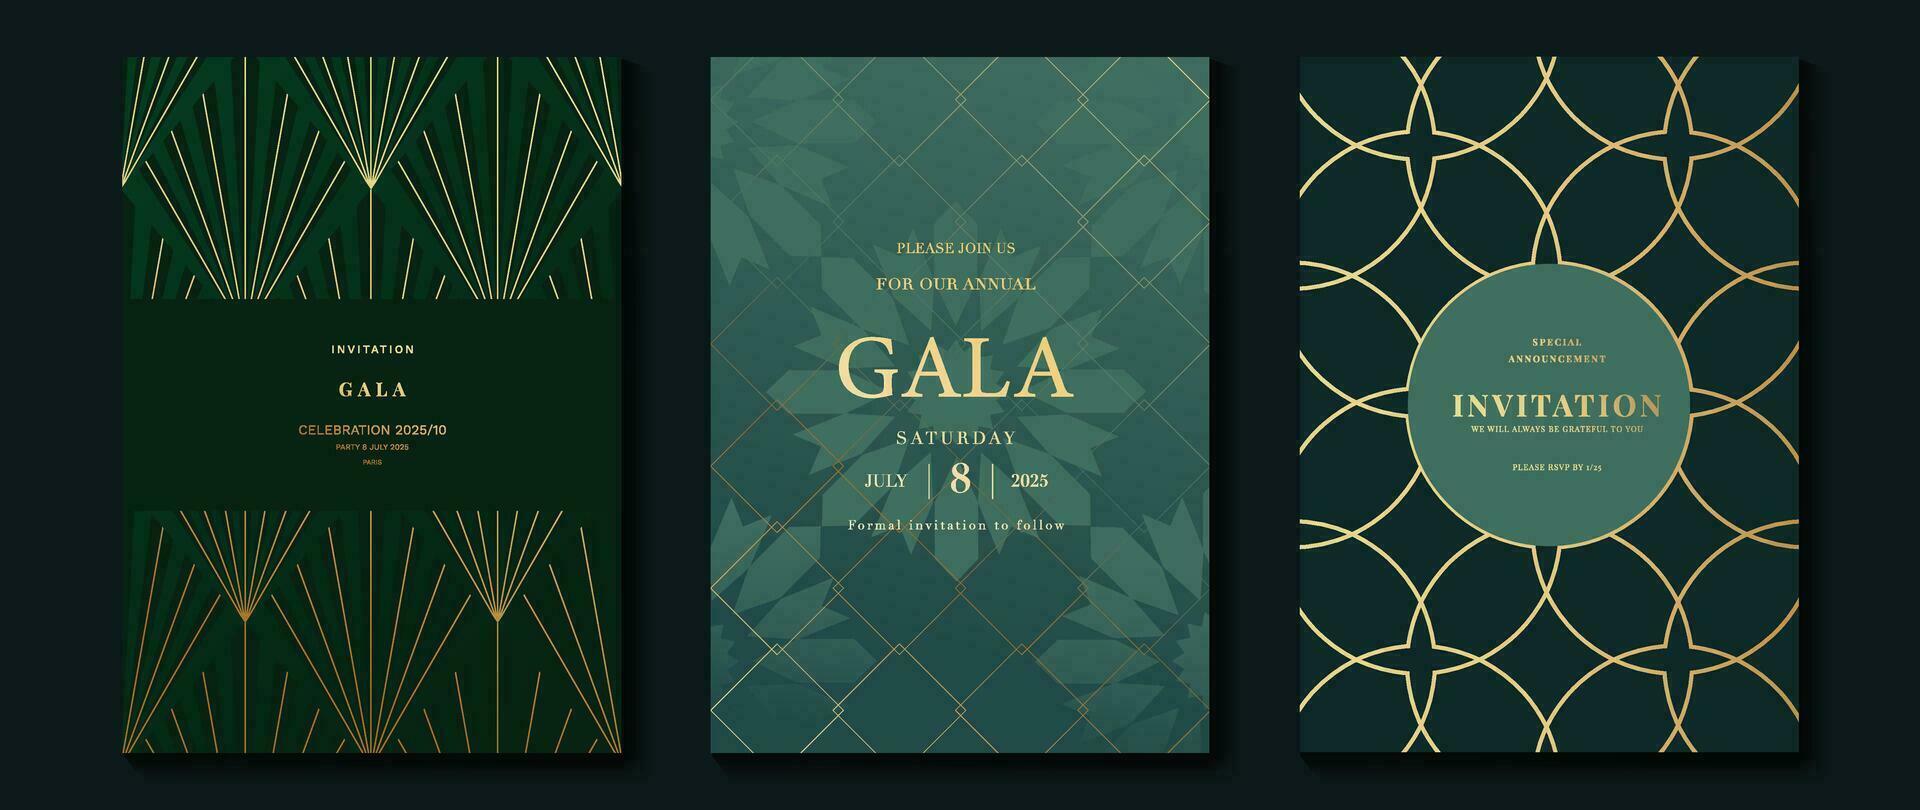 Luxury gala invitation card background vector. Golden elegant geometric shape,  gold flower on green background. Premium design illustration for wedding and vip cover template, grand opening. vector